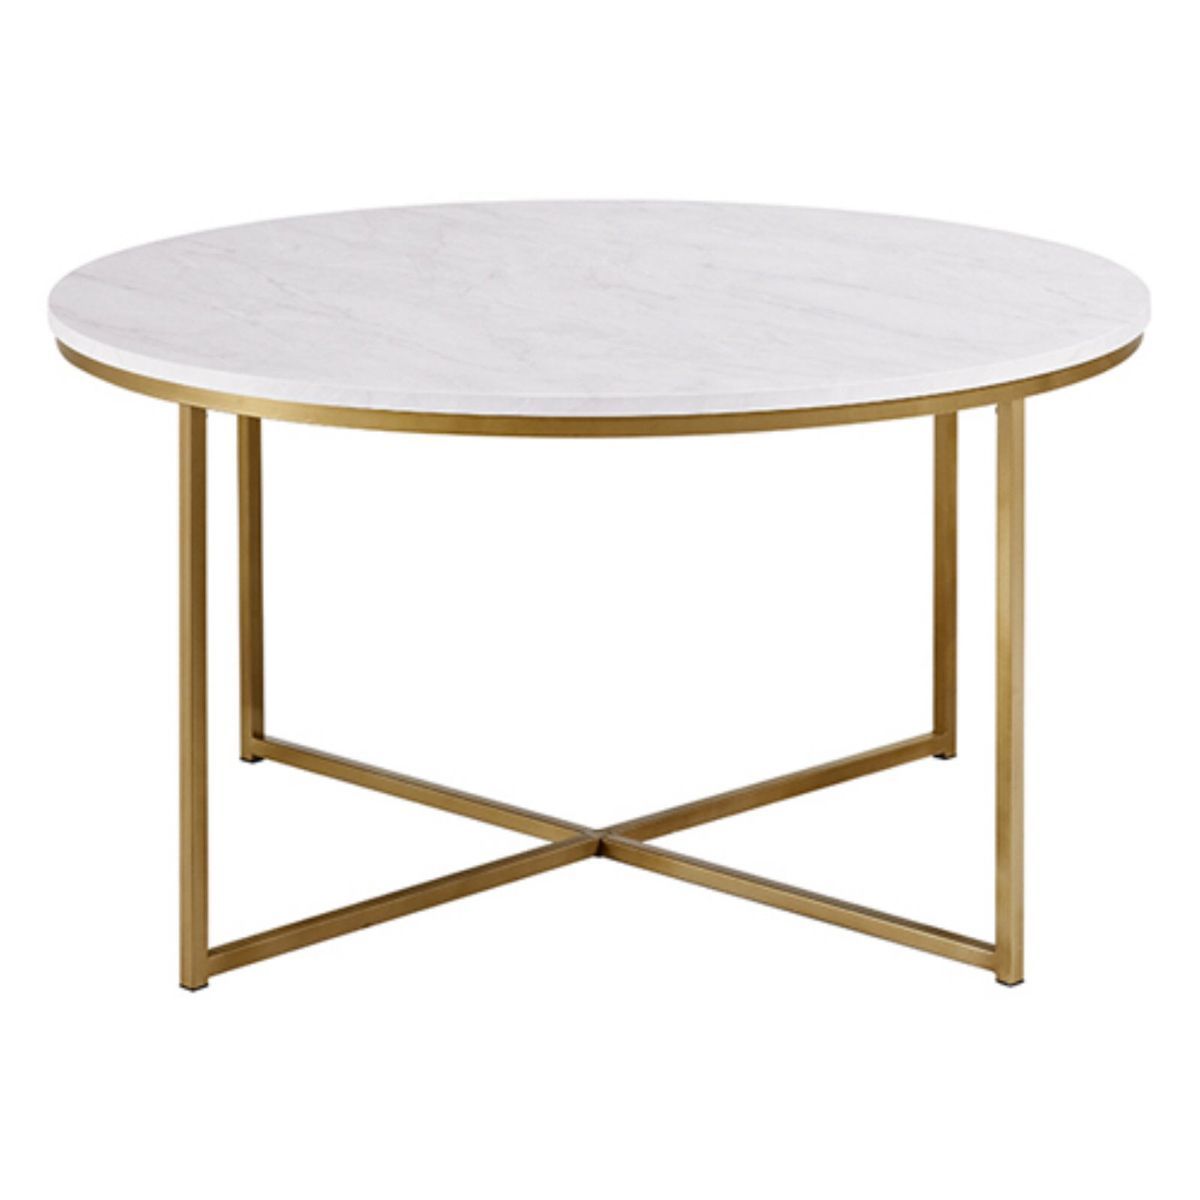 Modern Round White Faux Marble Coffee Table With Gold Base – Walmart Within Modern Round Faux Marble Coffee Tables (View 8 of 20)